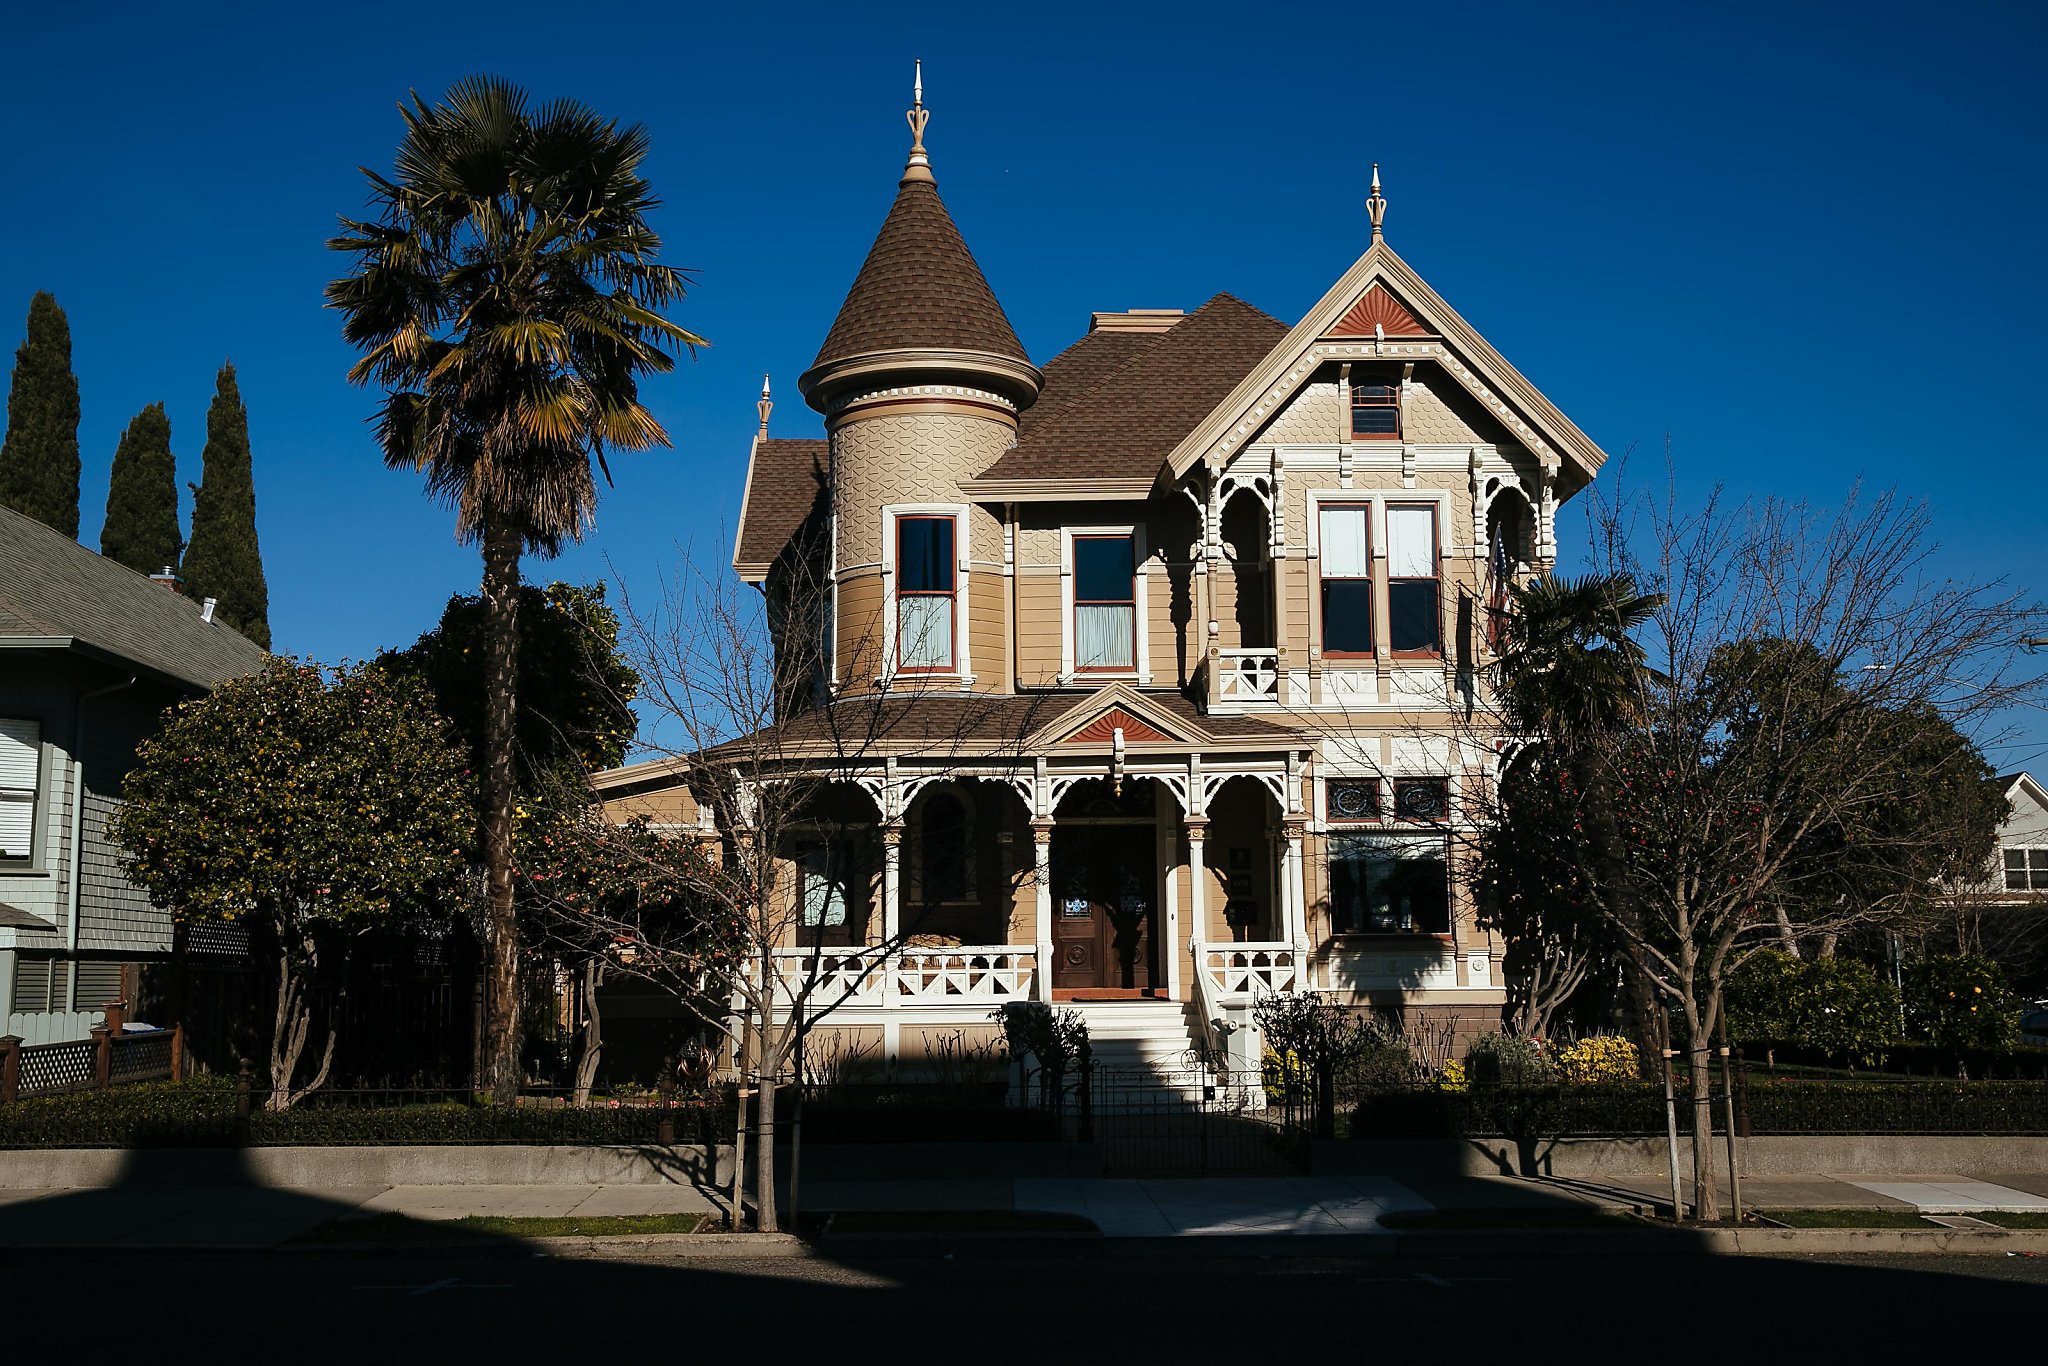 Historical homes you can own in the Napa Valley area